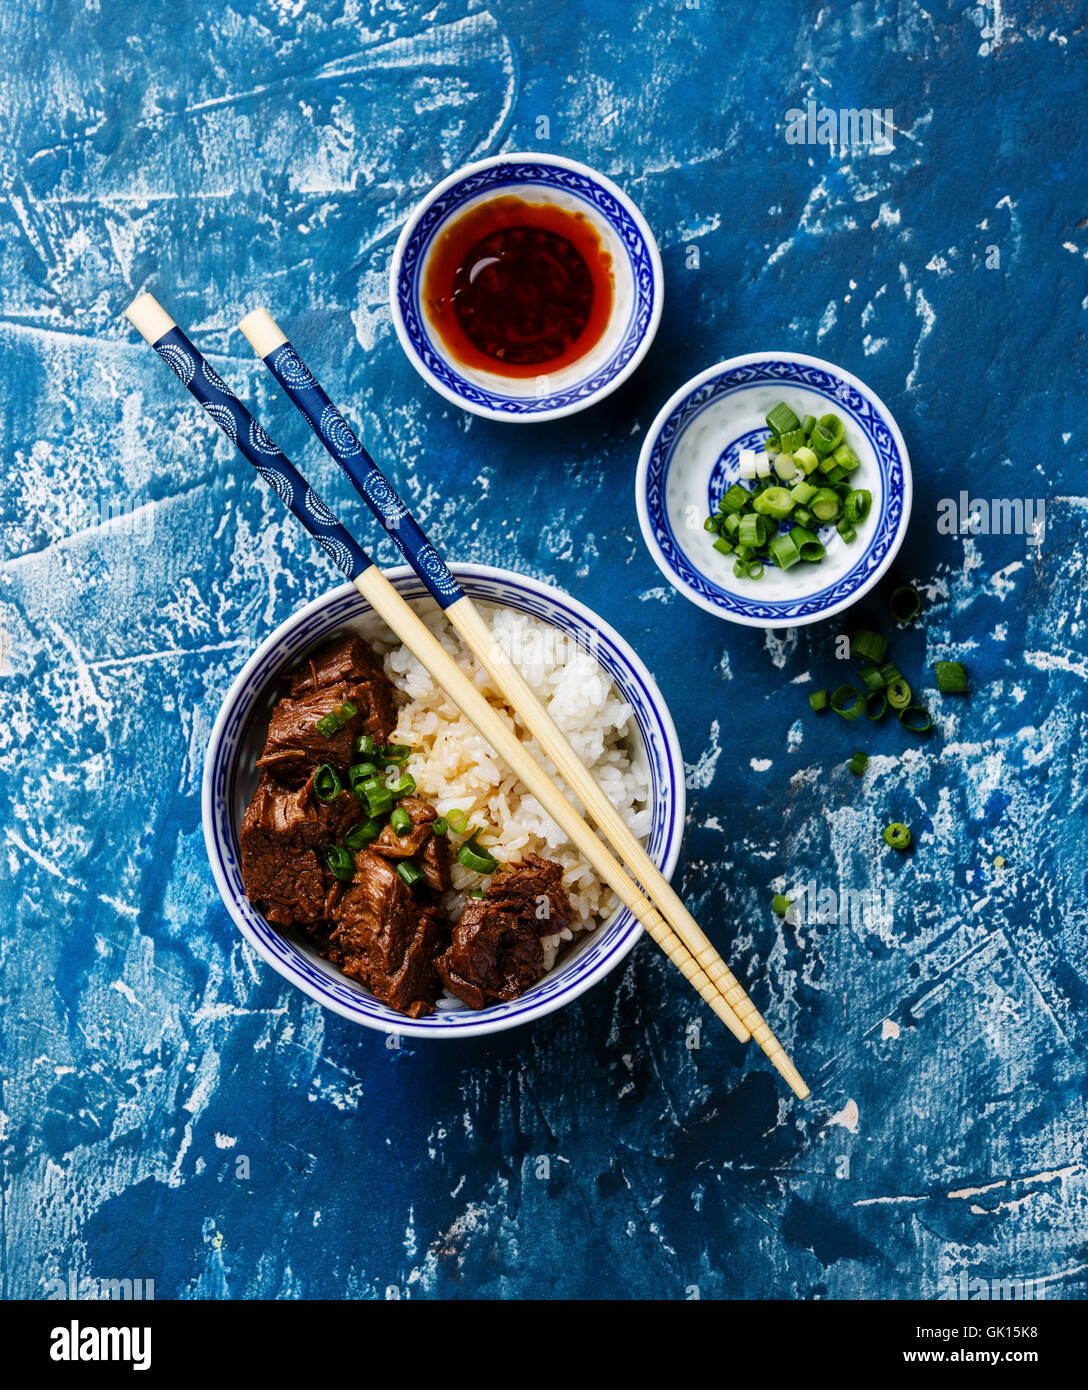 Slow cooked Beef with Rice and green onions in bowl on blue background Stock Photo